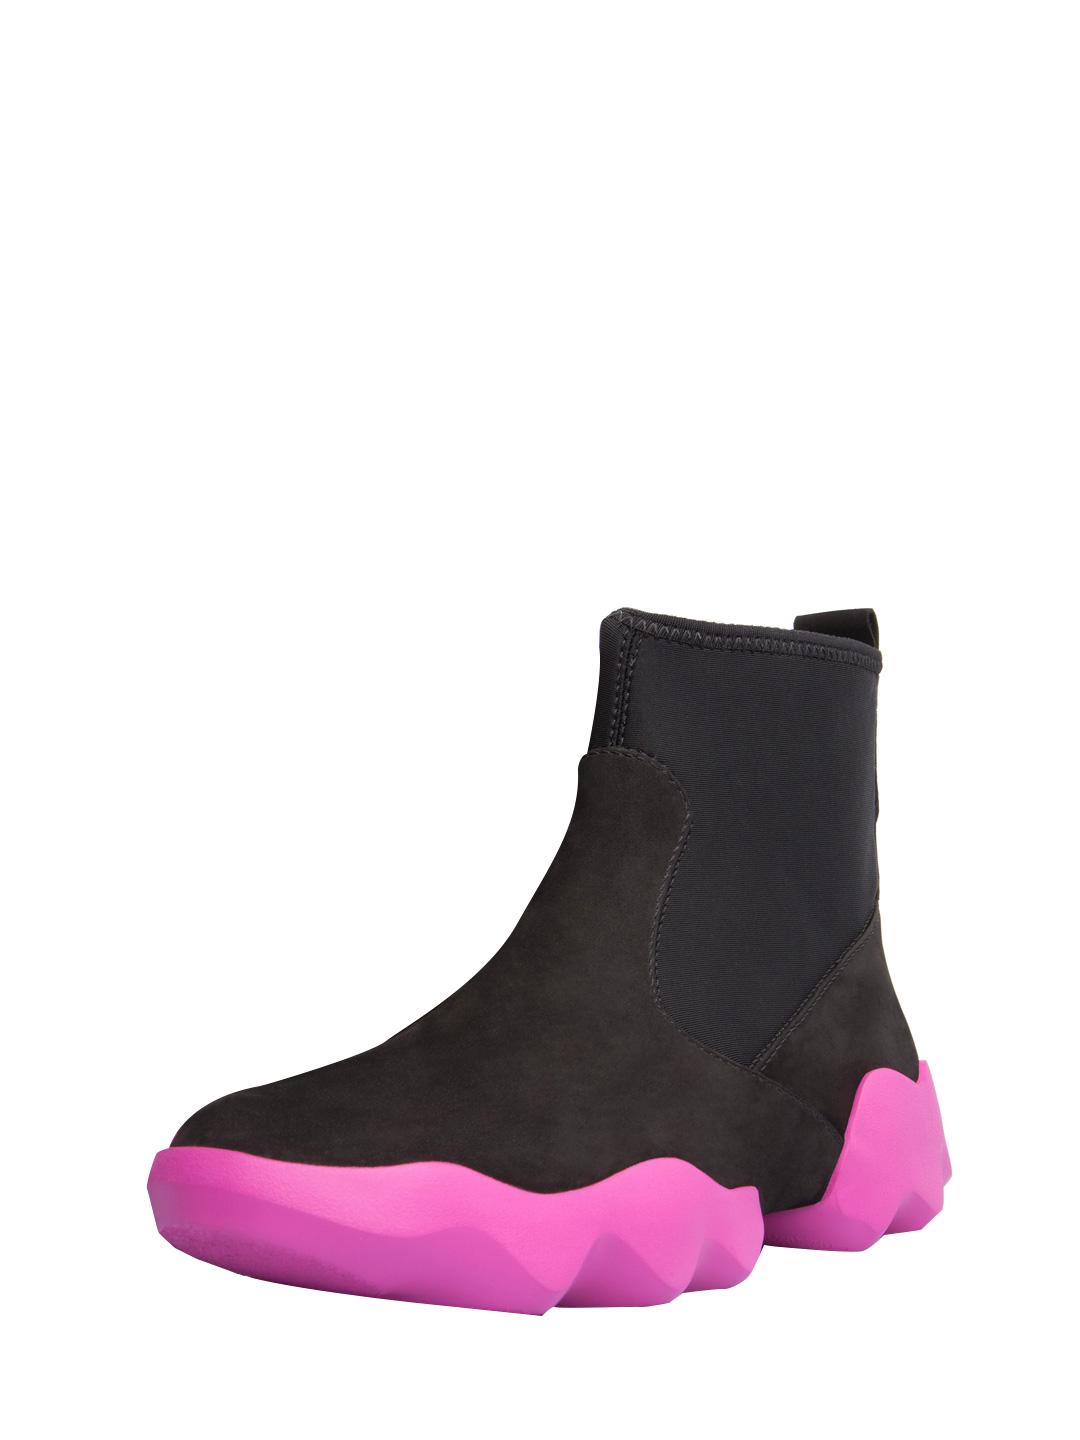 Manhattan Banket tempo Camper Leather Dub Contrast Sole Ankle Boots in Black/Pink (Black) - Lyst